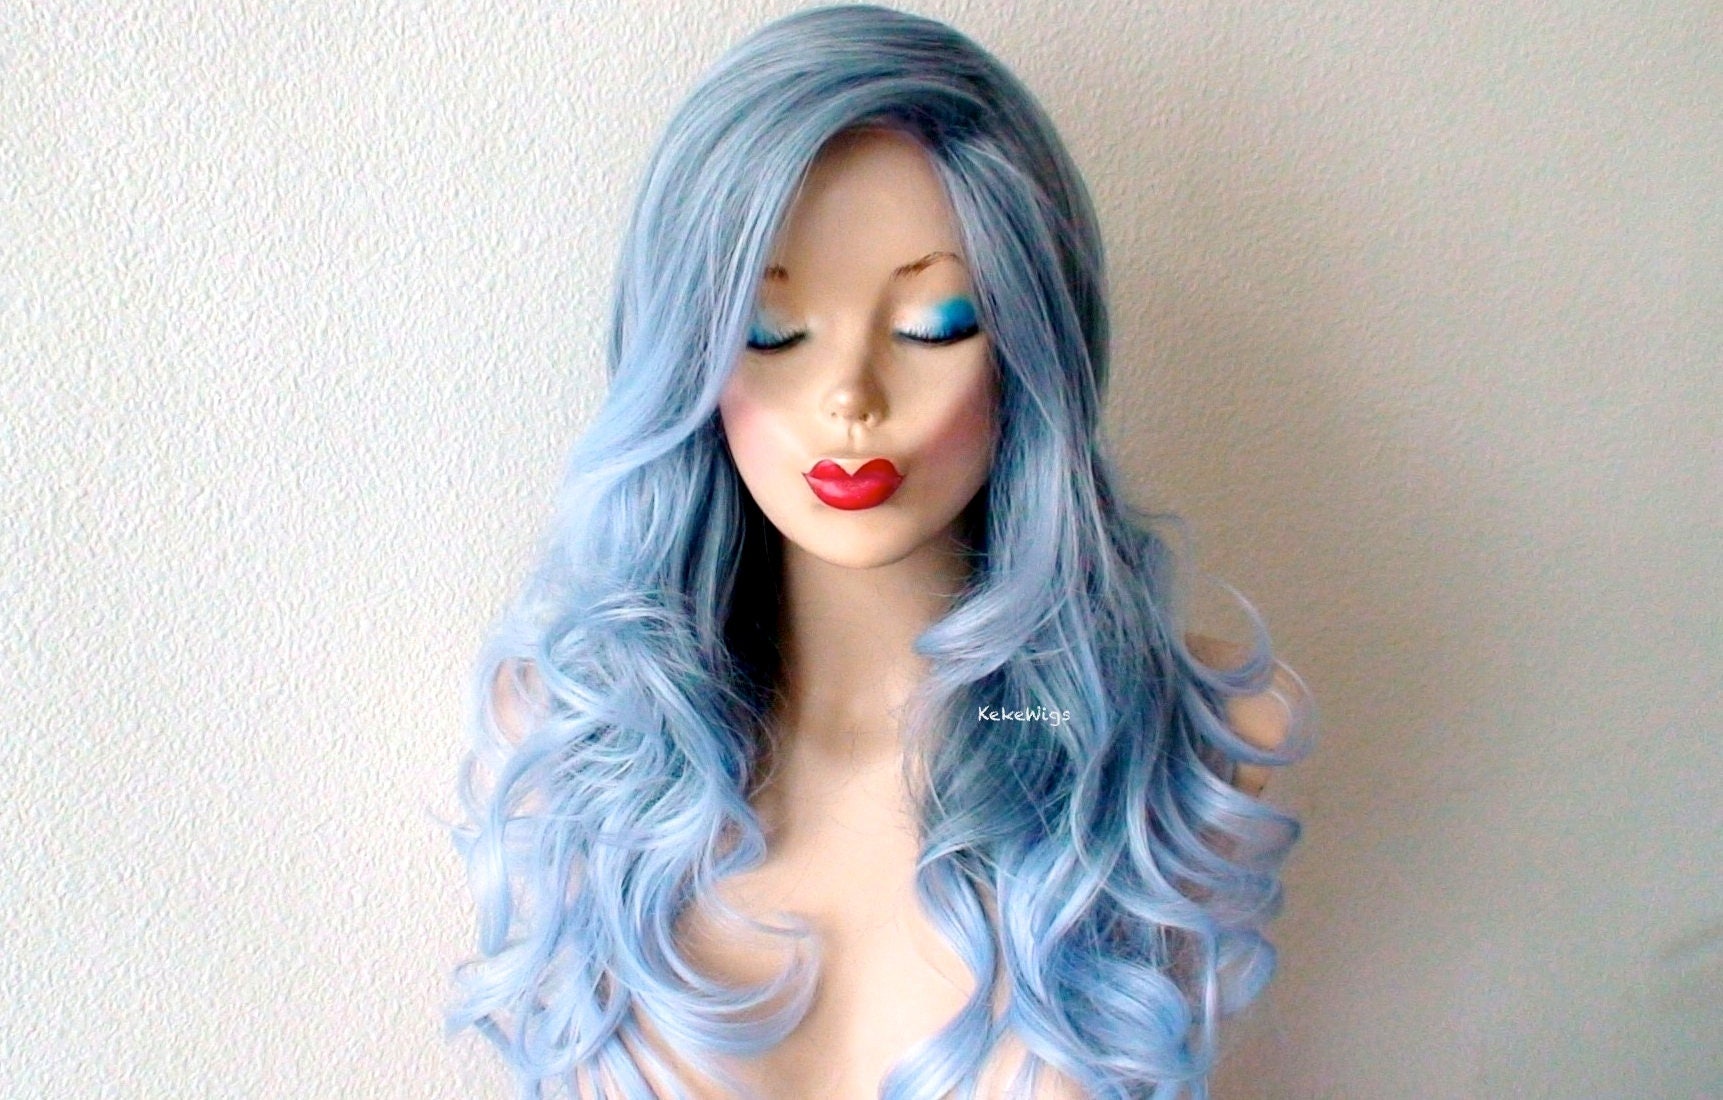 2. "Baby Blue Ombre Wig" - wide 1